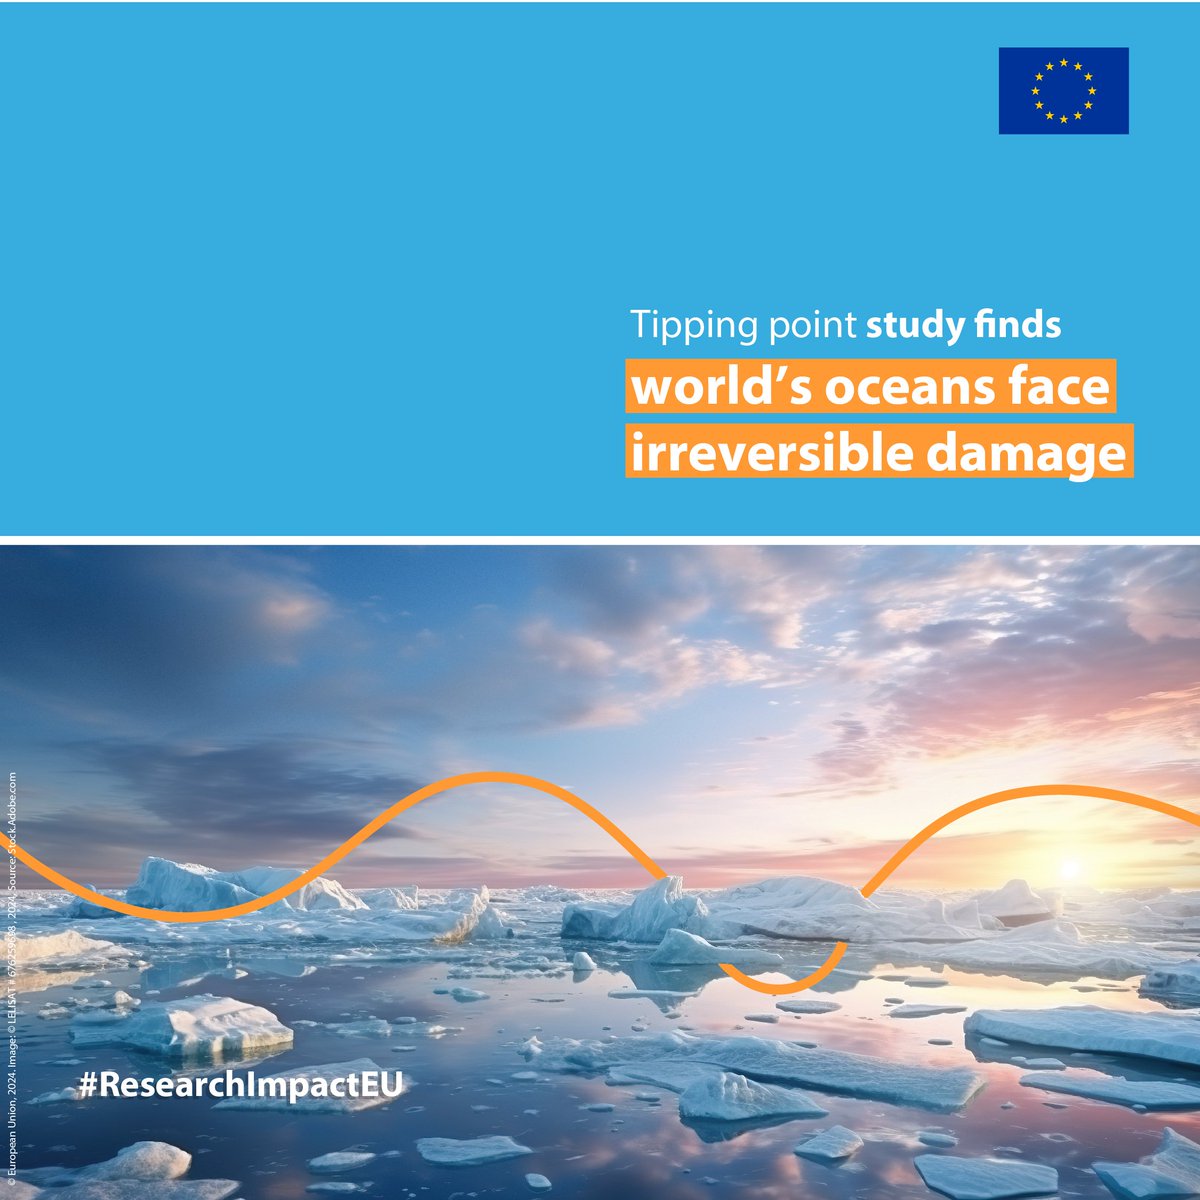 Our oceans are warming, acidifying, and losing oxygen. These are troubling consequences of climate change for marine ecosystems.

A 4-year study by #EUfunded researchers indicates drastic action is needed now – before it’s too late.

👉 europa.eu/!HHbhqG

#ResearchImpactEU